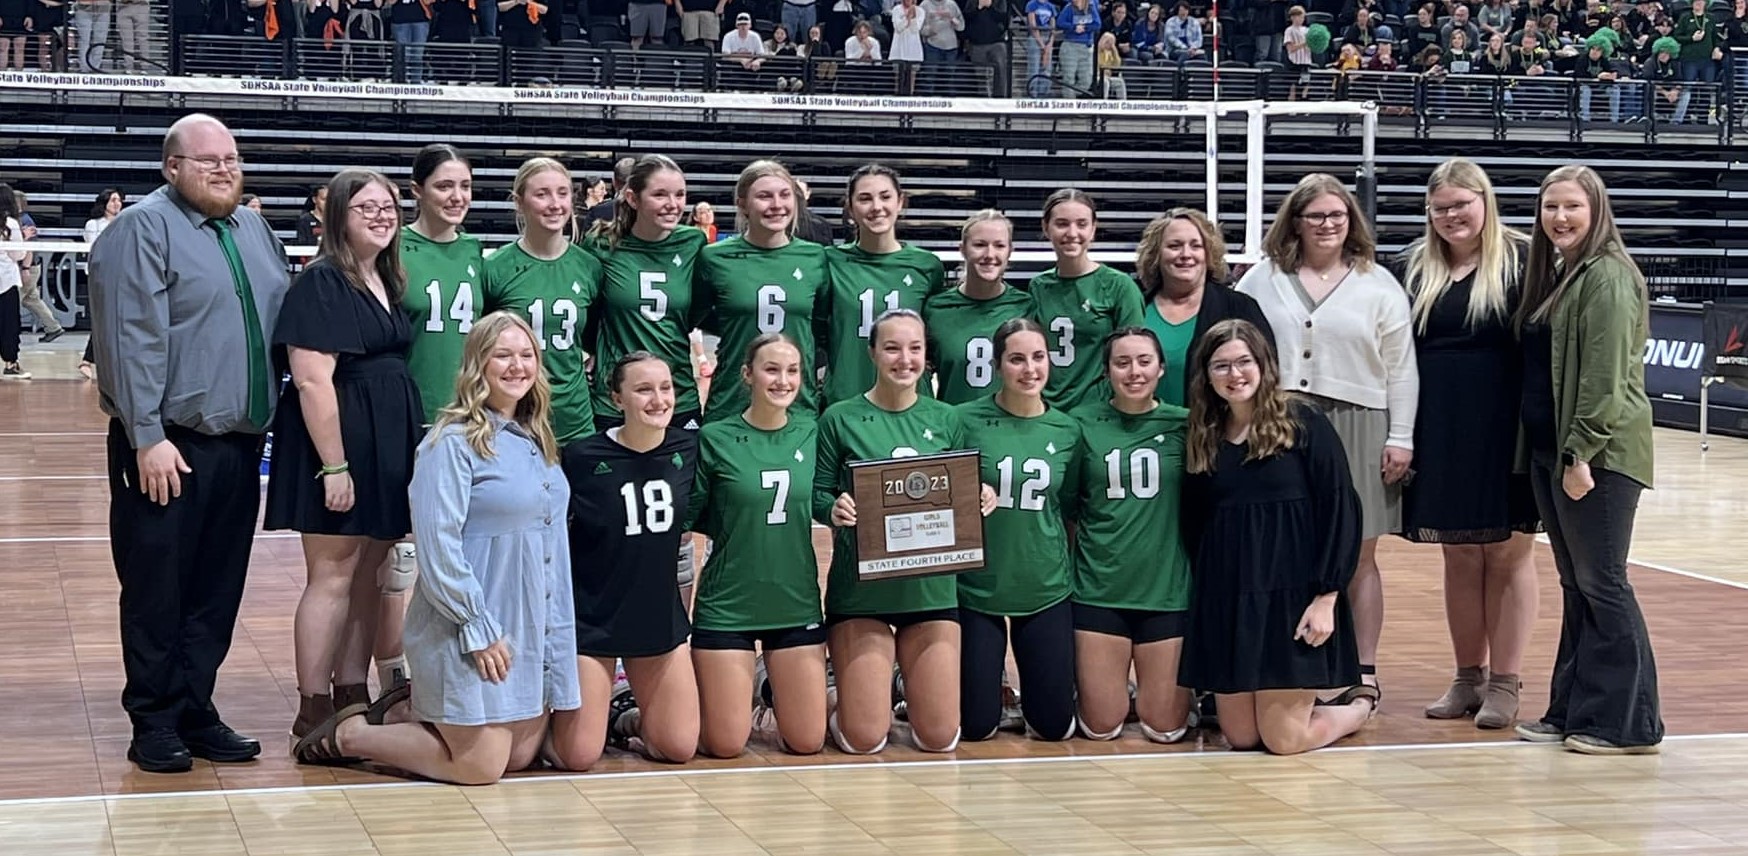 The volleyball team placed 4th at the State Tournament